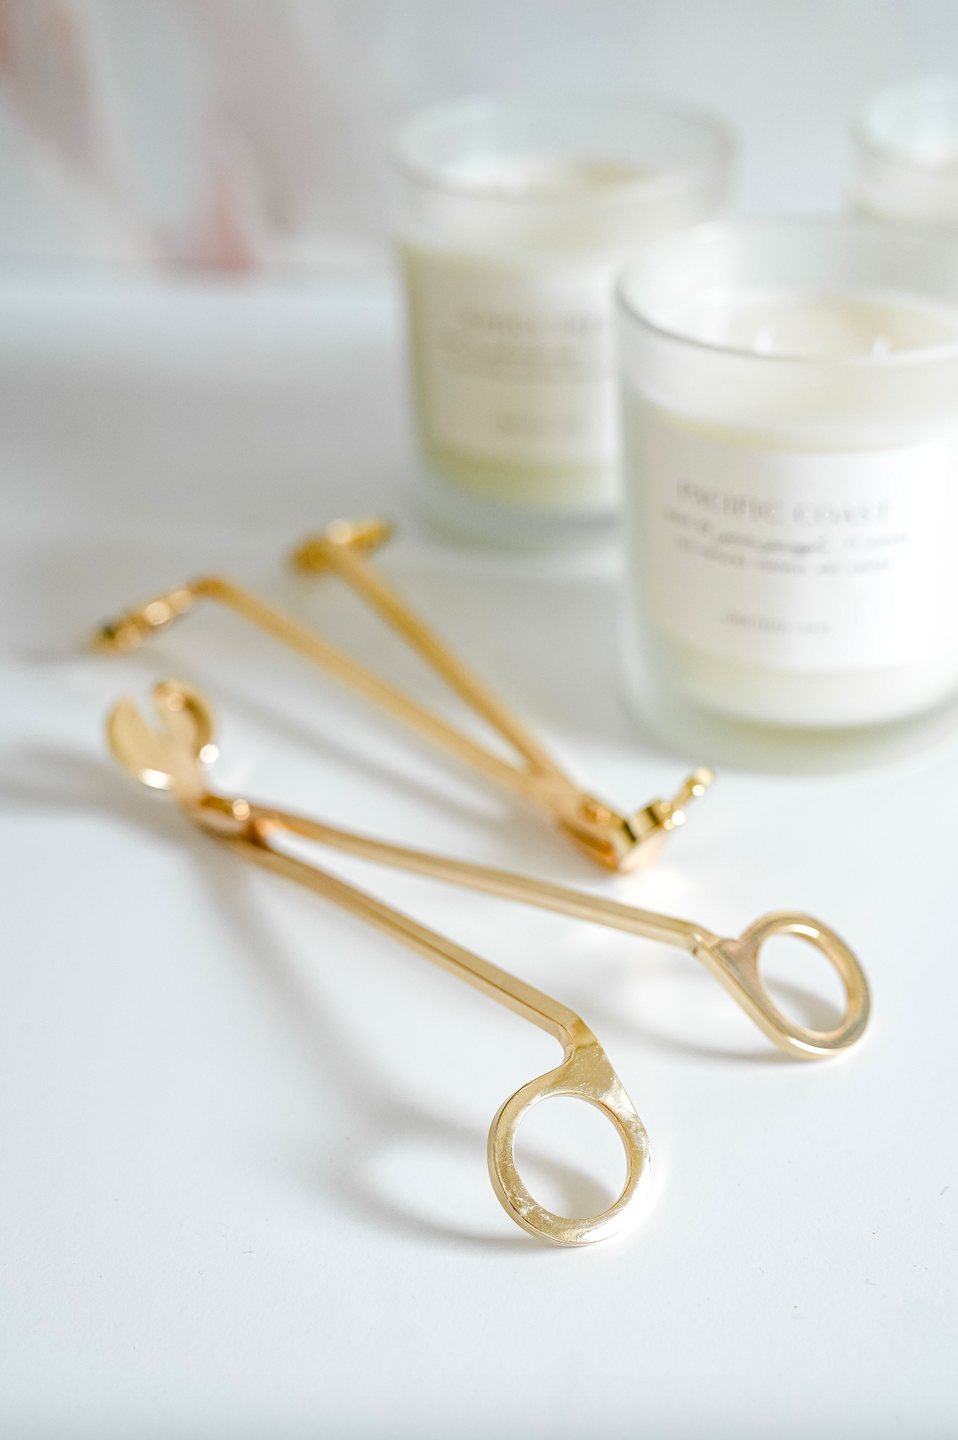  Golden Wick Trimmer by Orchid + Ash Orchid + Ash Perfumarie